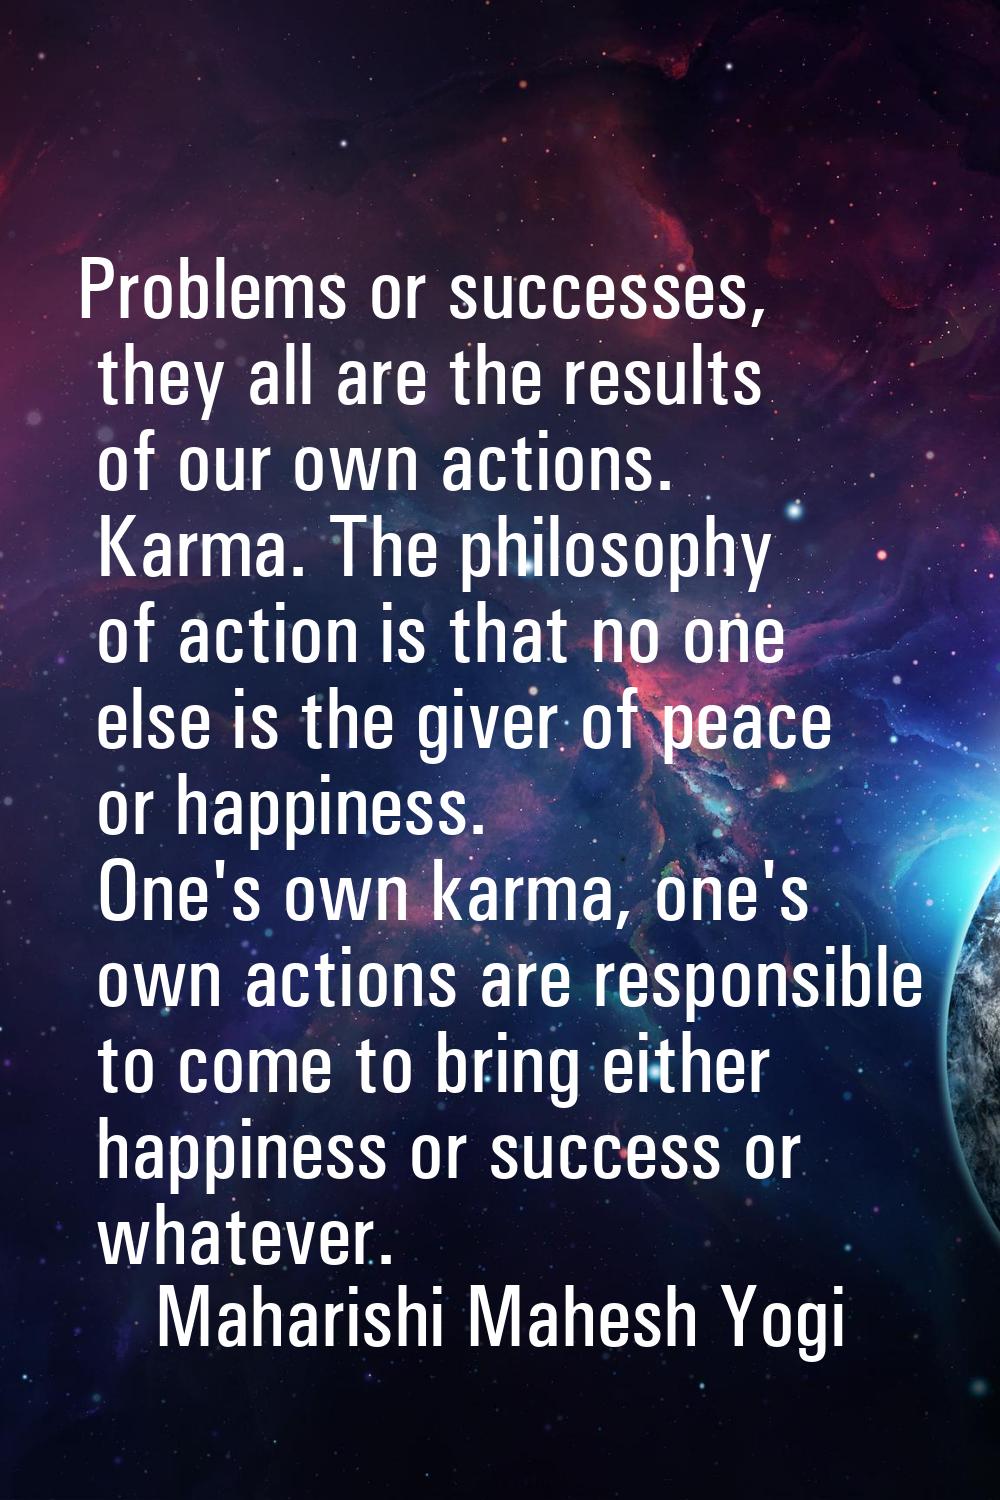 Problems or successes, they all are the results of our own actions. Karma. The philosophy of action